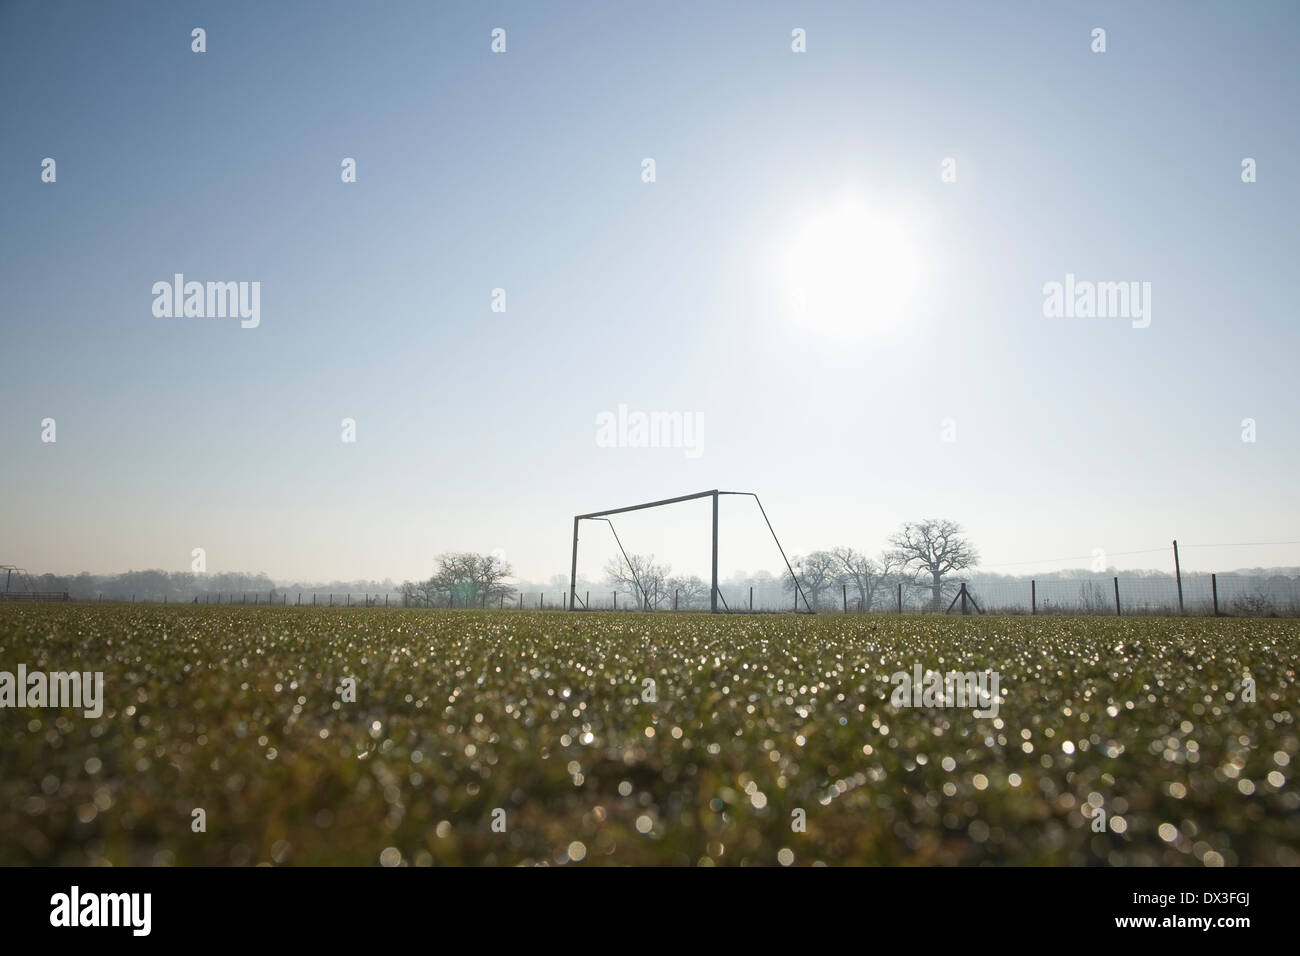 empty football pitch and goal on a frosty winter morning sunrise Stock Photo